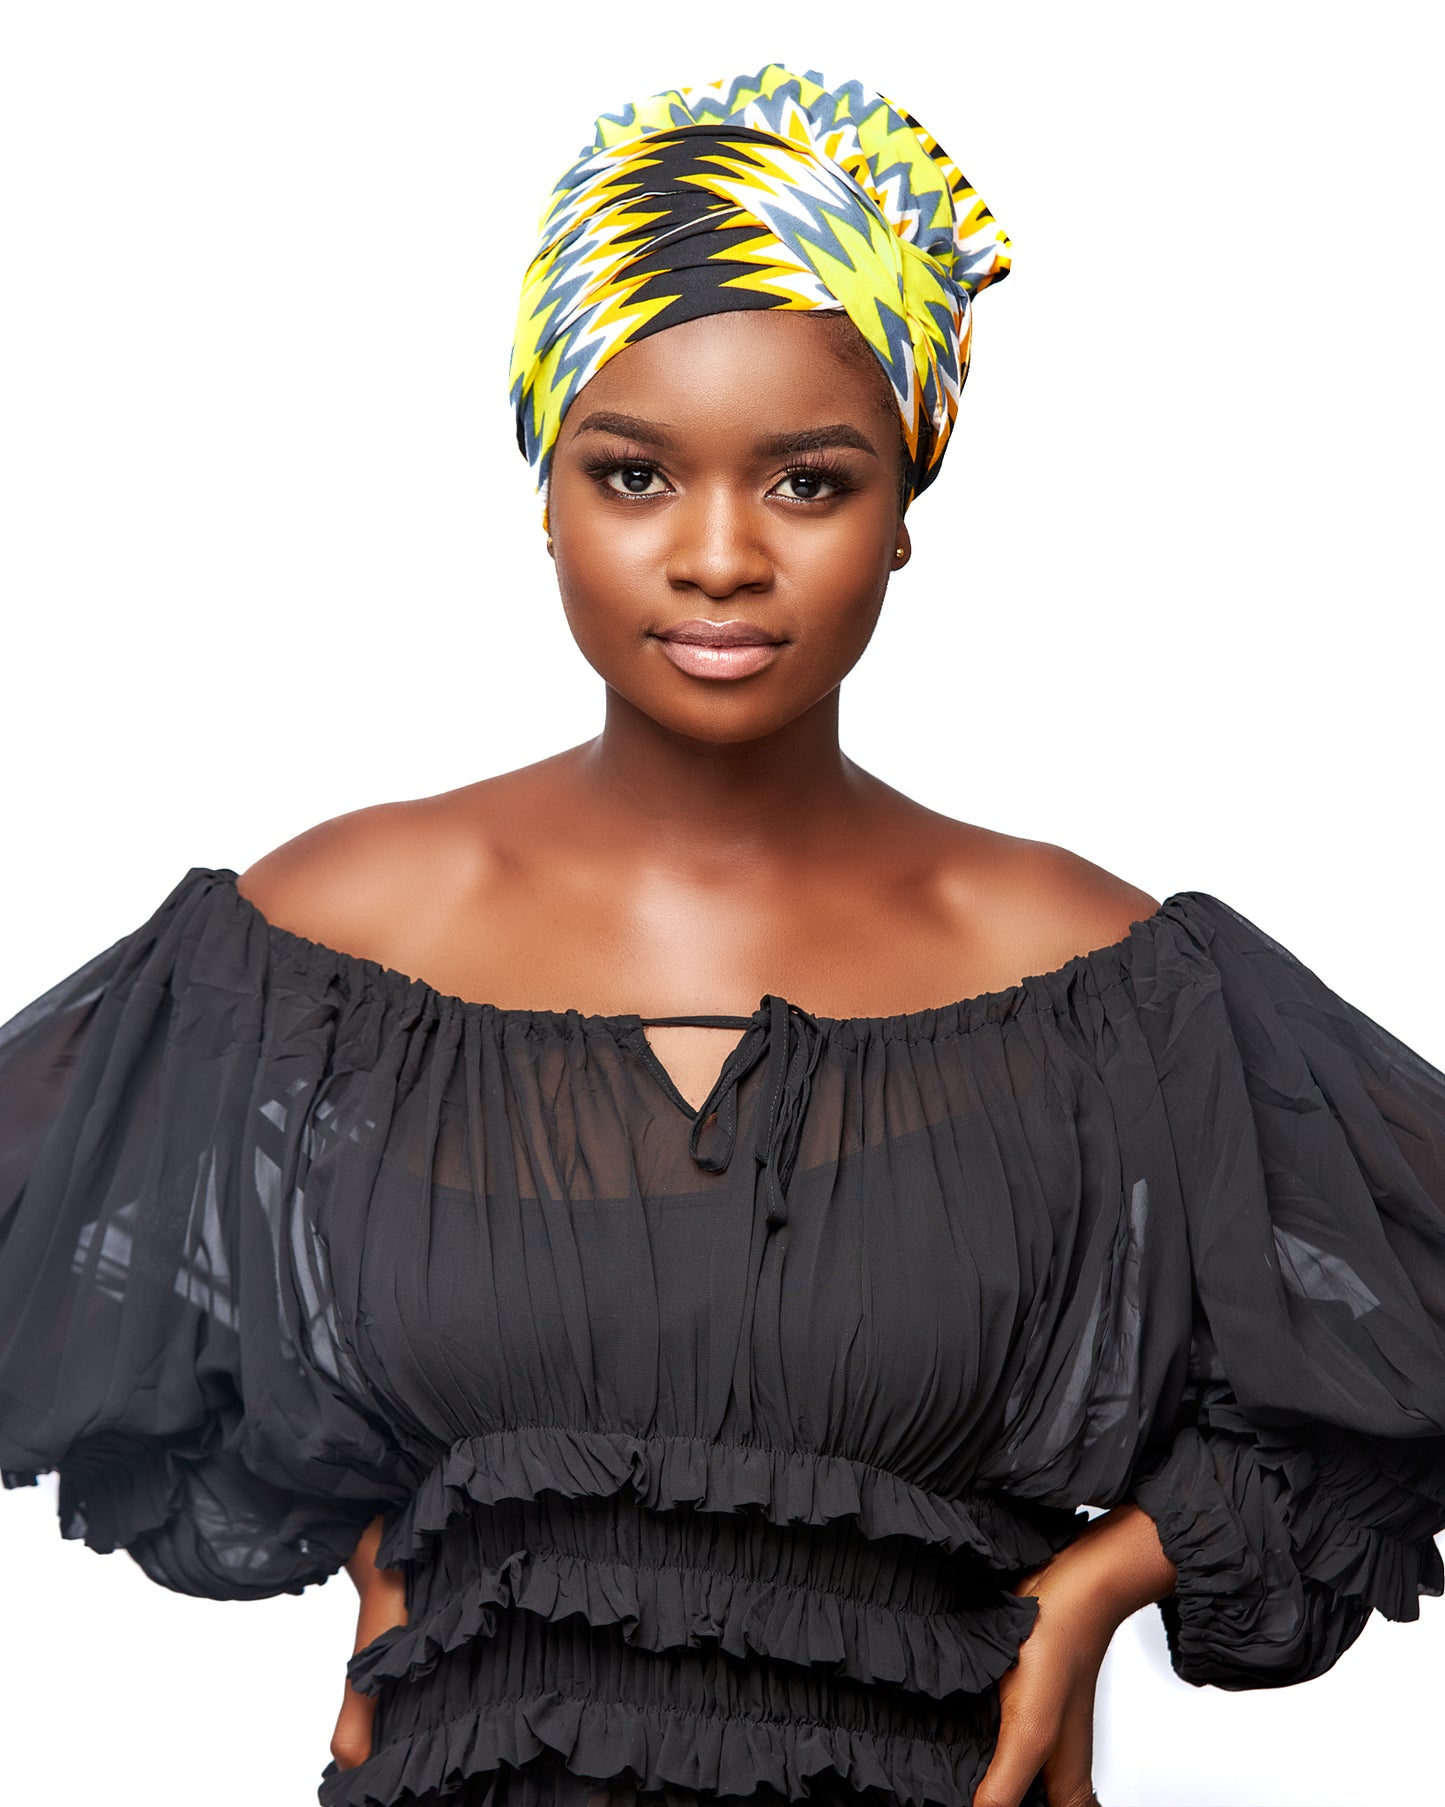 A Ghanaian Kente Wax Print Made of Yellow, Gold ,Ash ,Black and White Blended Beautiful Colours And Pattern, Hand Made Elastic Silklined Bonnet With Band